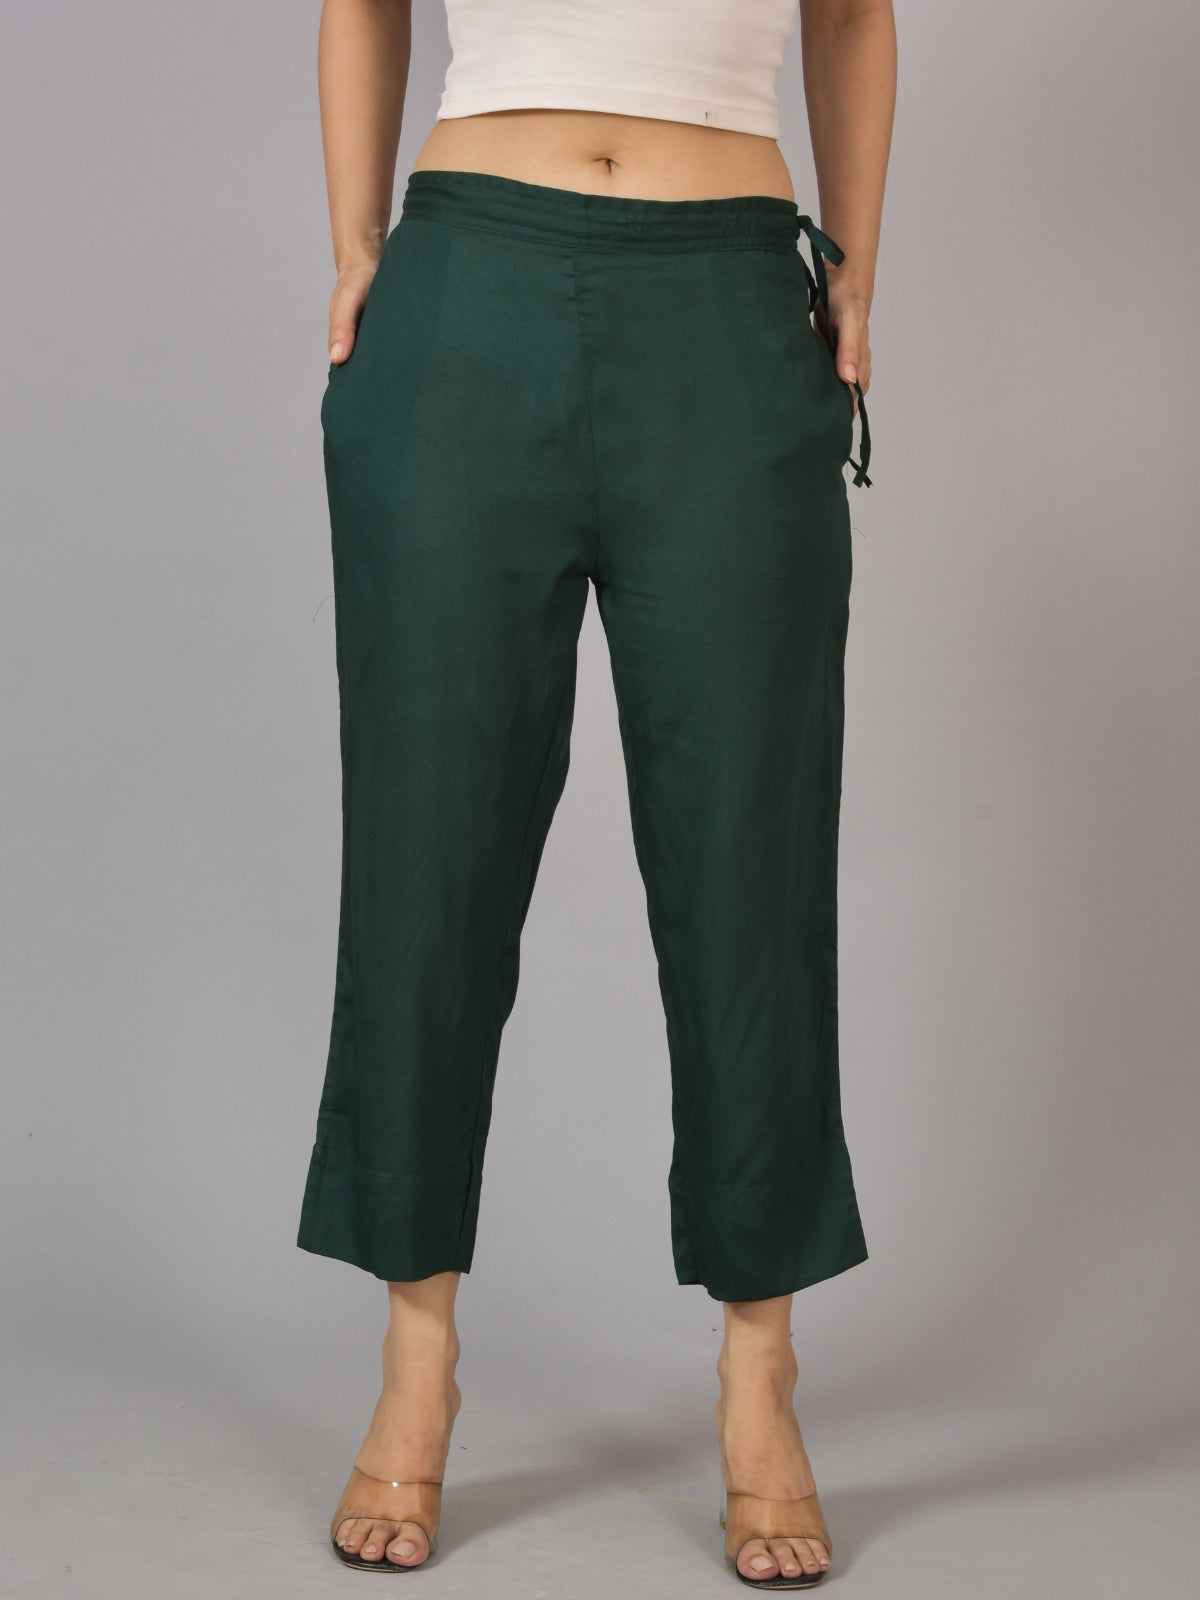 Pack Of 2 Womens Dark Green And Teal Blue Ankle Length Rayon Culottes Trouser Combo